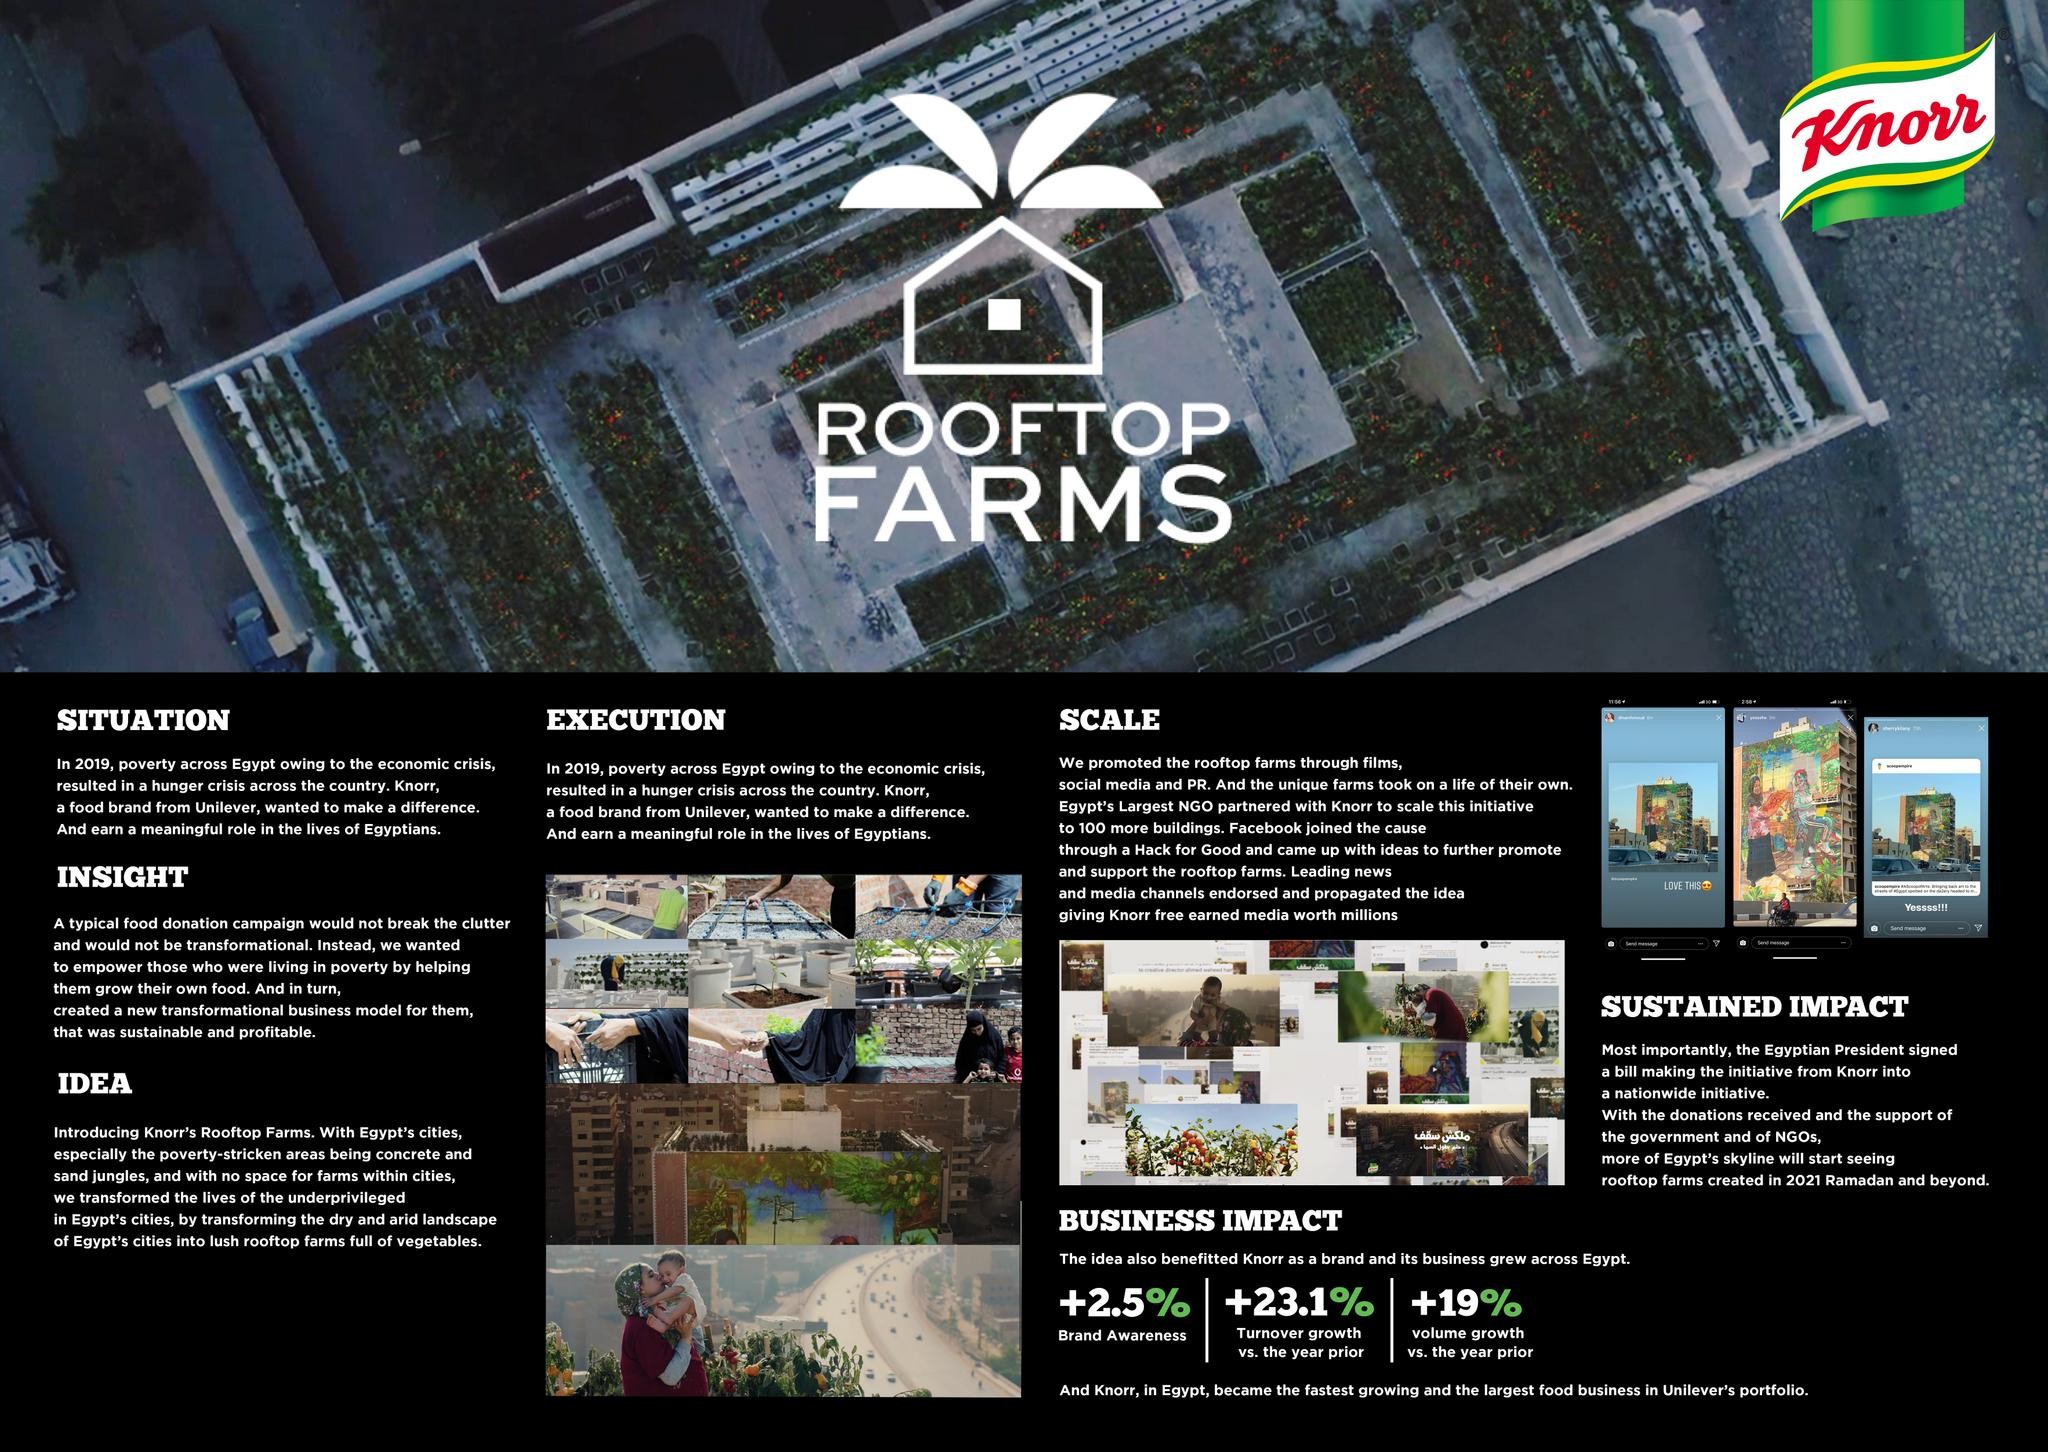 Rooftop Farms